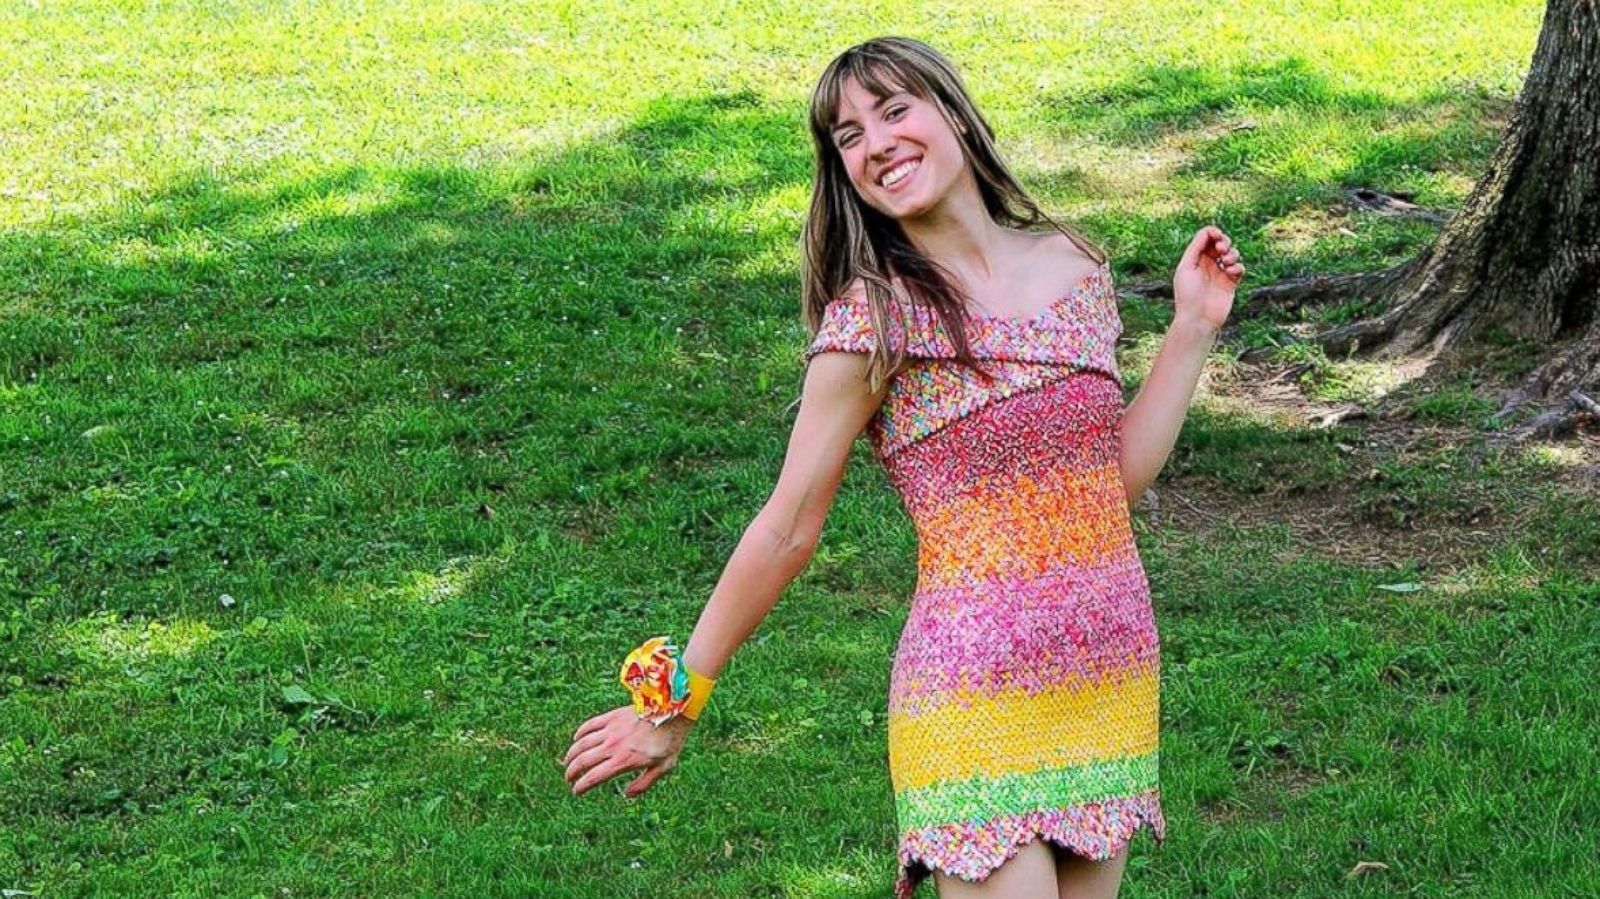 Woman Makes Dress Out Of More Than 10 000 Starburst Candy Wrappers Abc News